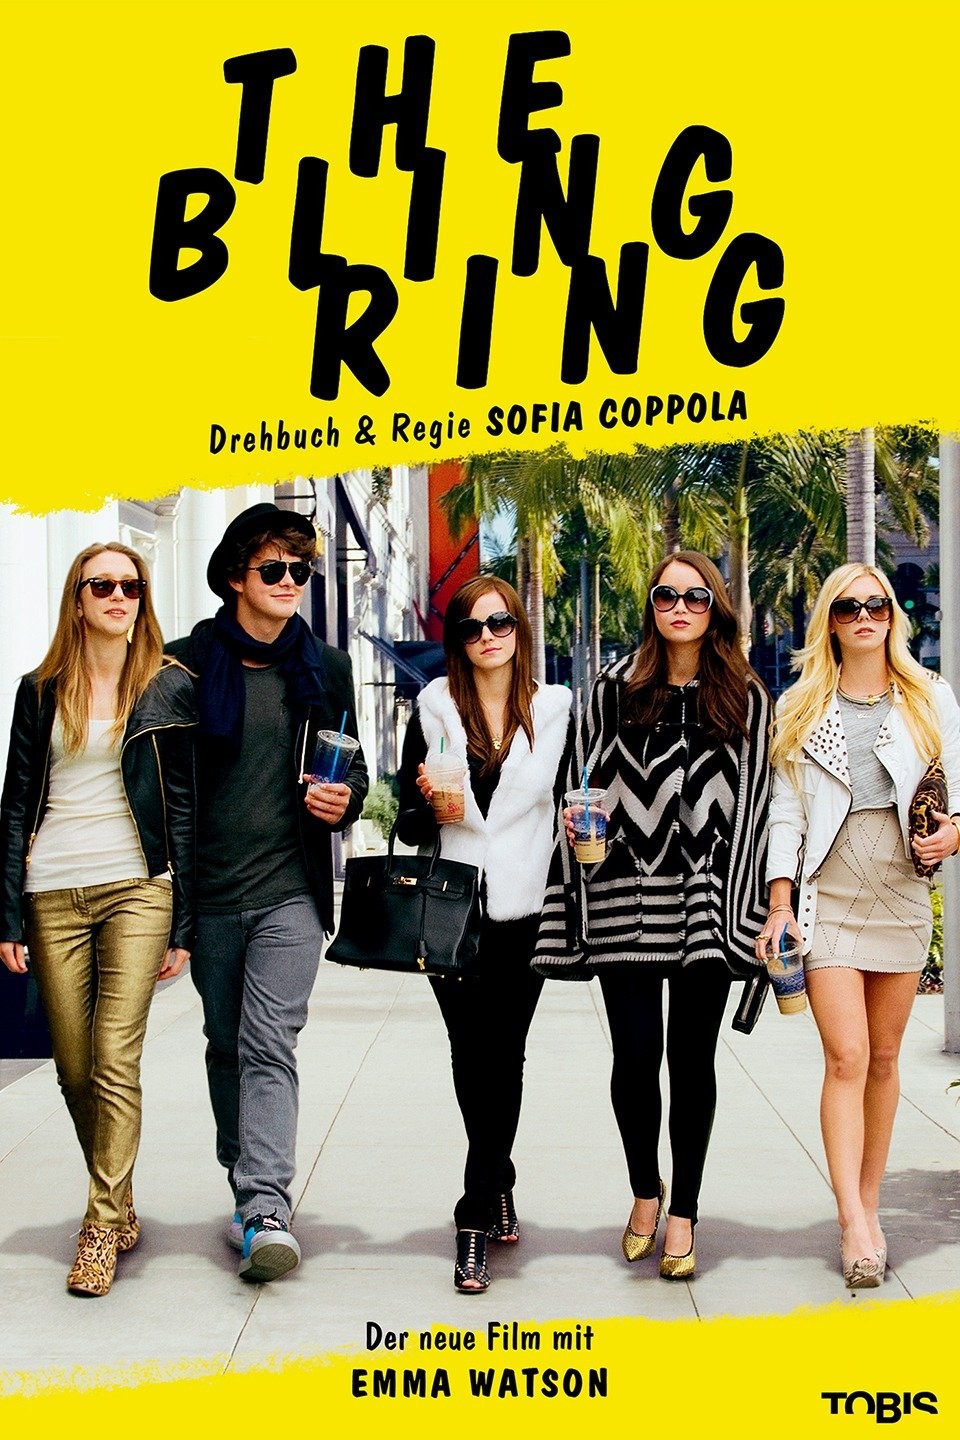 New images of Emma Watson in Sofia Coppola's THE BLING RING